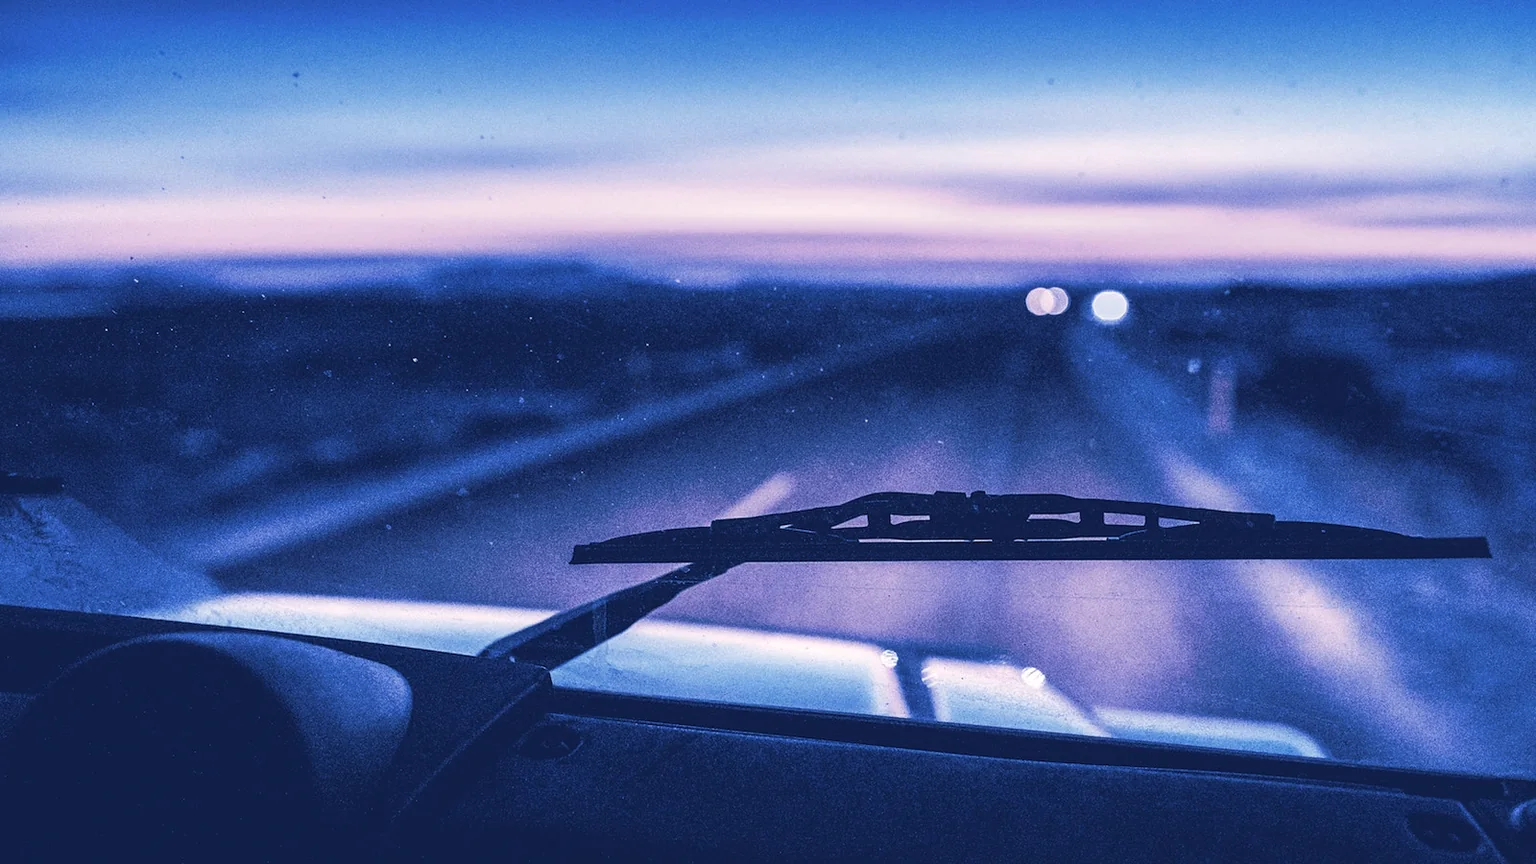 The existential Ethereum road trip continues. But is Vitalik the best driver? PHOTO CREDIT: Shutterstock